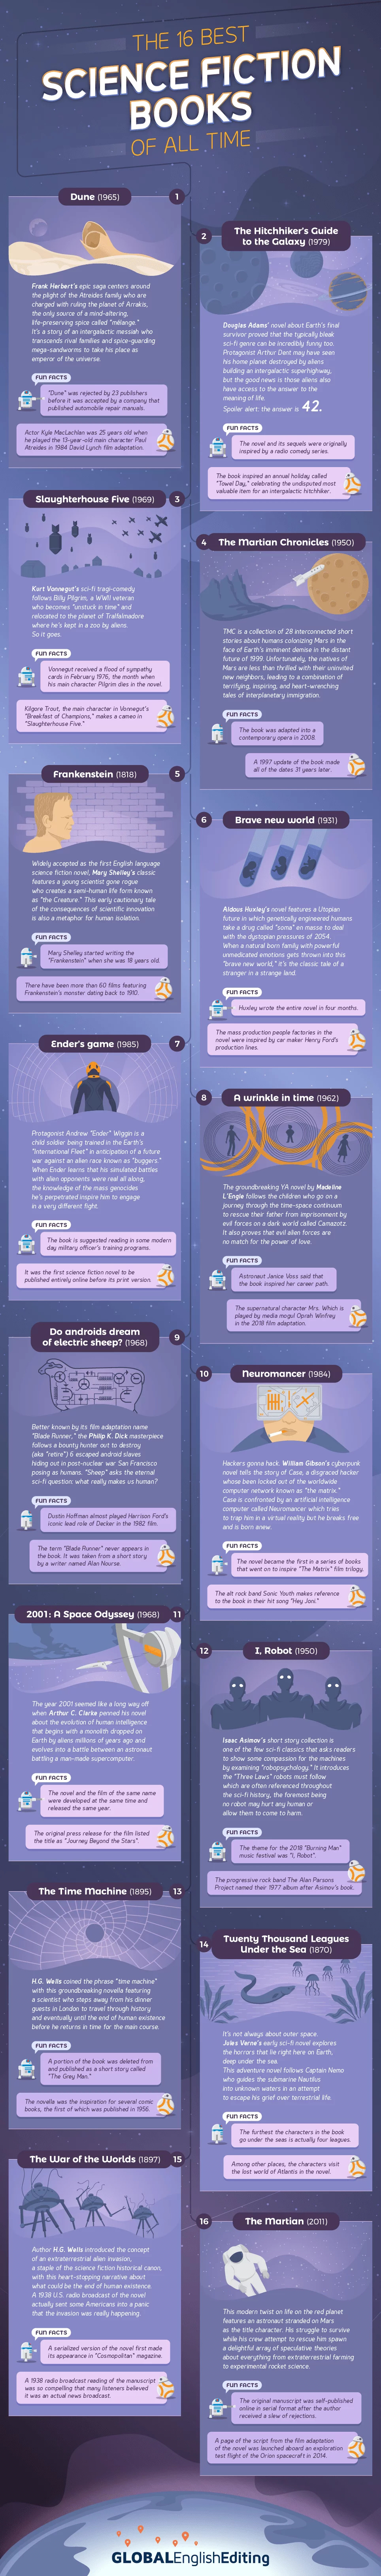 science fiction - infographic